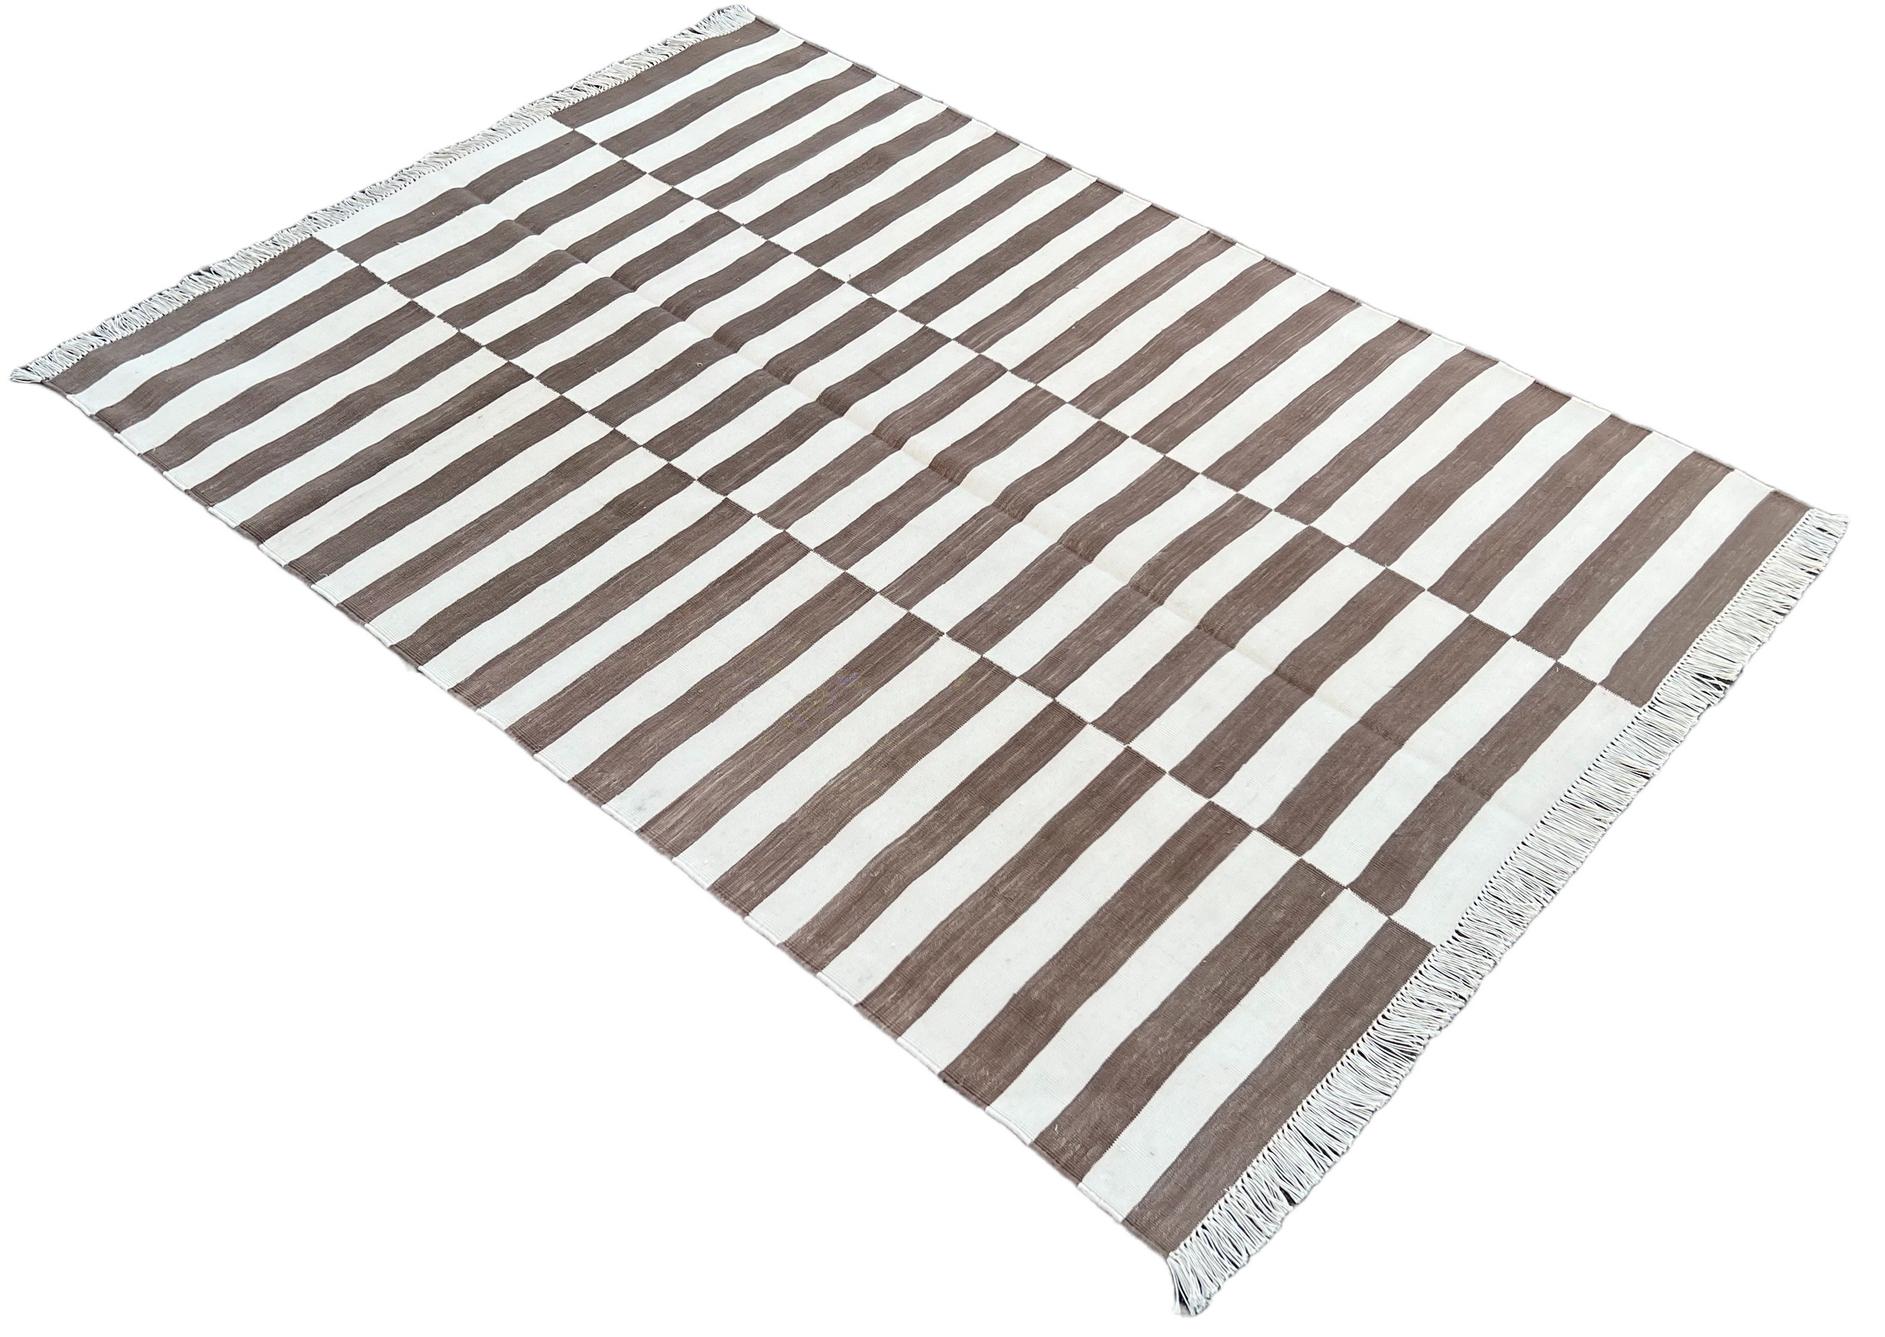 Hand-Woven Handmade Cotton Area Flat Weave Rug, 4x6 Brown And White Striped Indian Dhurrie For Sale